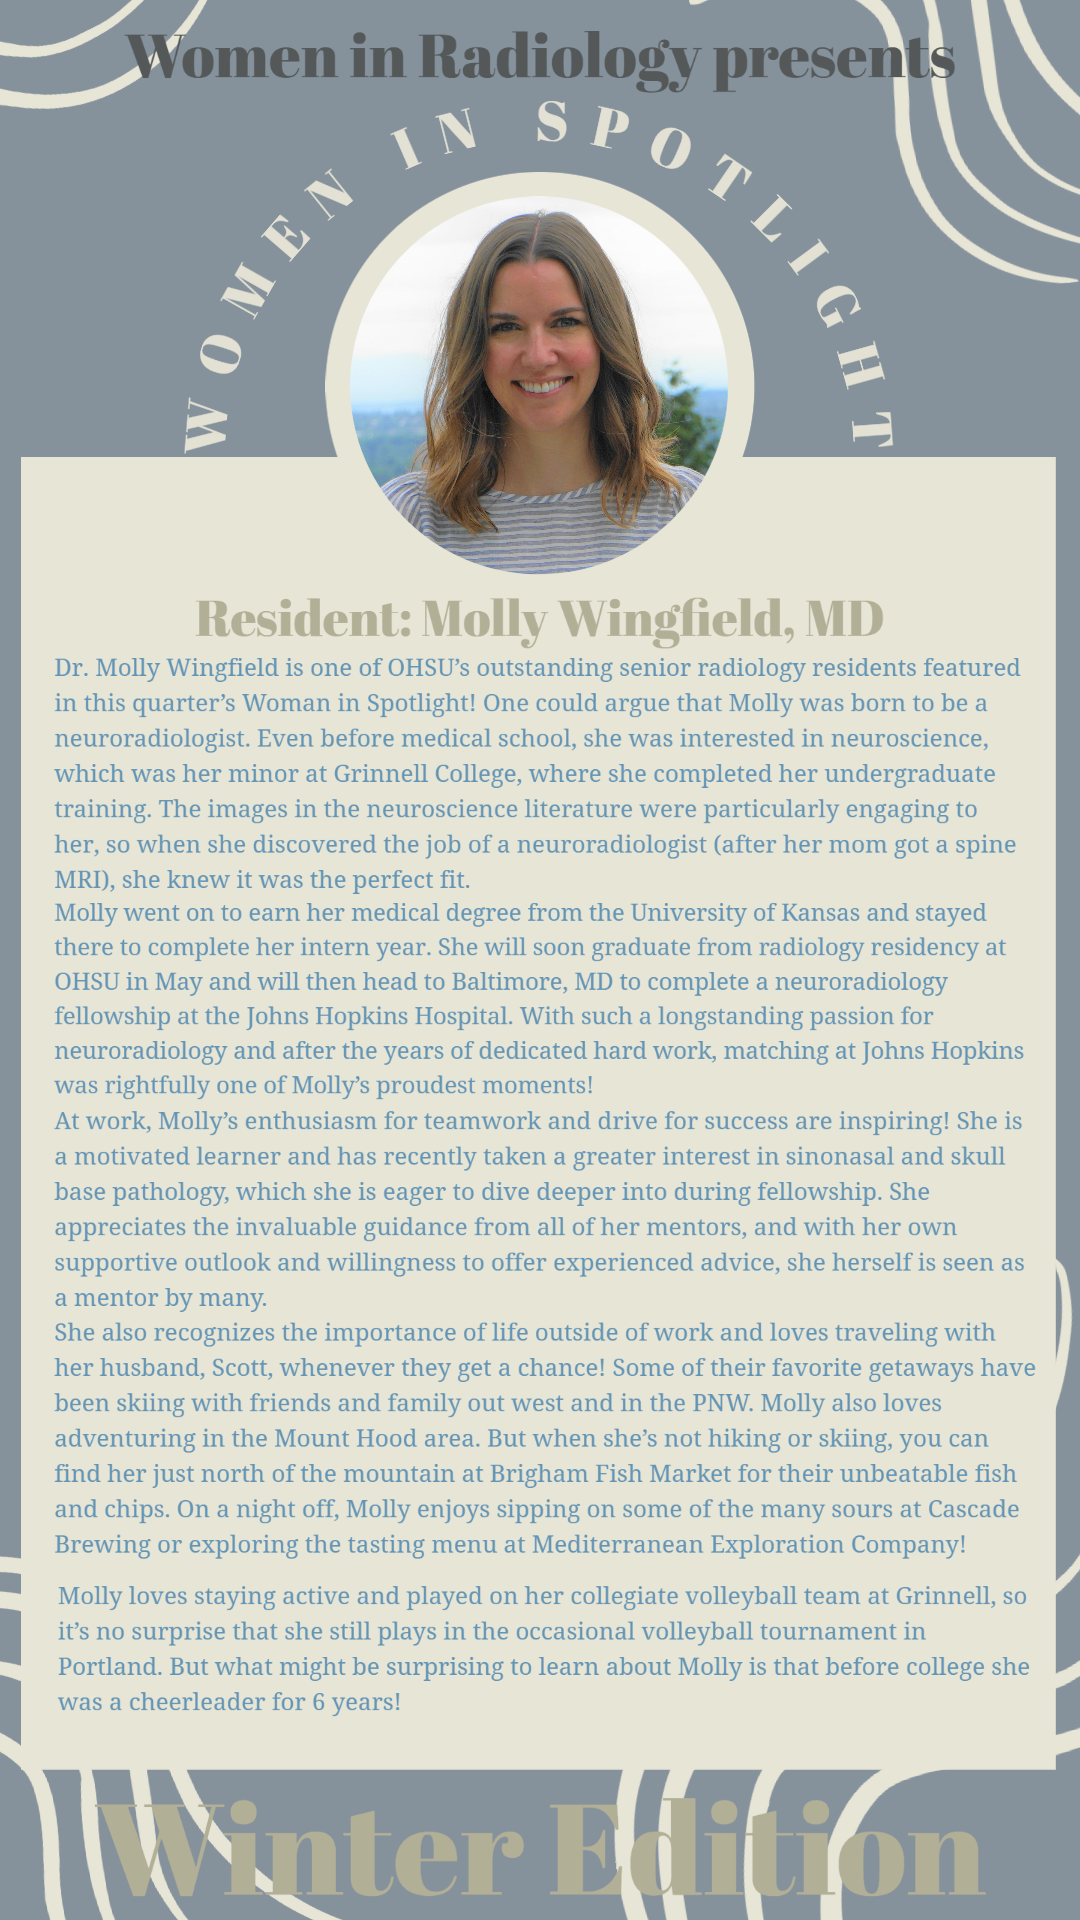 Picture and Bio of Resident Dr. Molly Wingfield: Dr. Molly Wingfield is one of OHSU’s outstanding senior radiology residents featured in this quarter’s Woman in Spotlight! One could argue that Molly was born to be a neuroradiologist. Even before medical school, she was interested in neuroscience, which was her minor at Grinnell College, where she completed her undergraduate training. The images in the neuroscience literature were particularly engaging to her, so when she discovered the job of a neuroradiolo